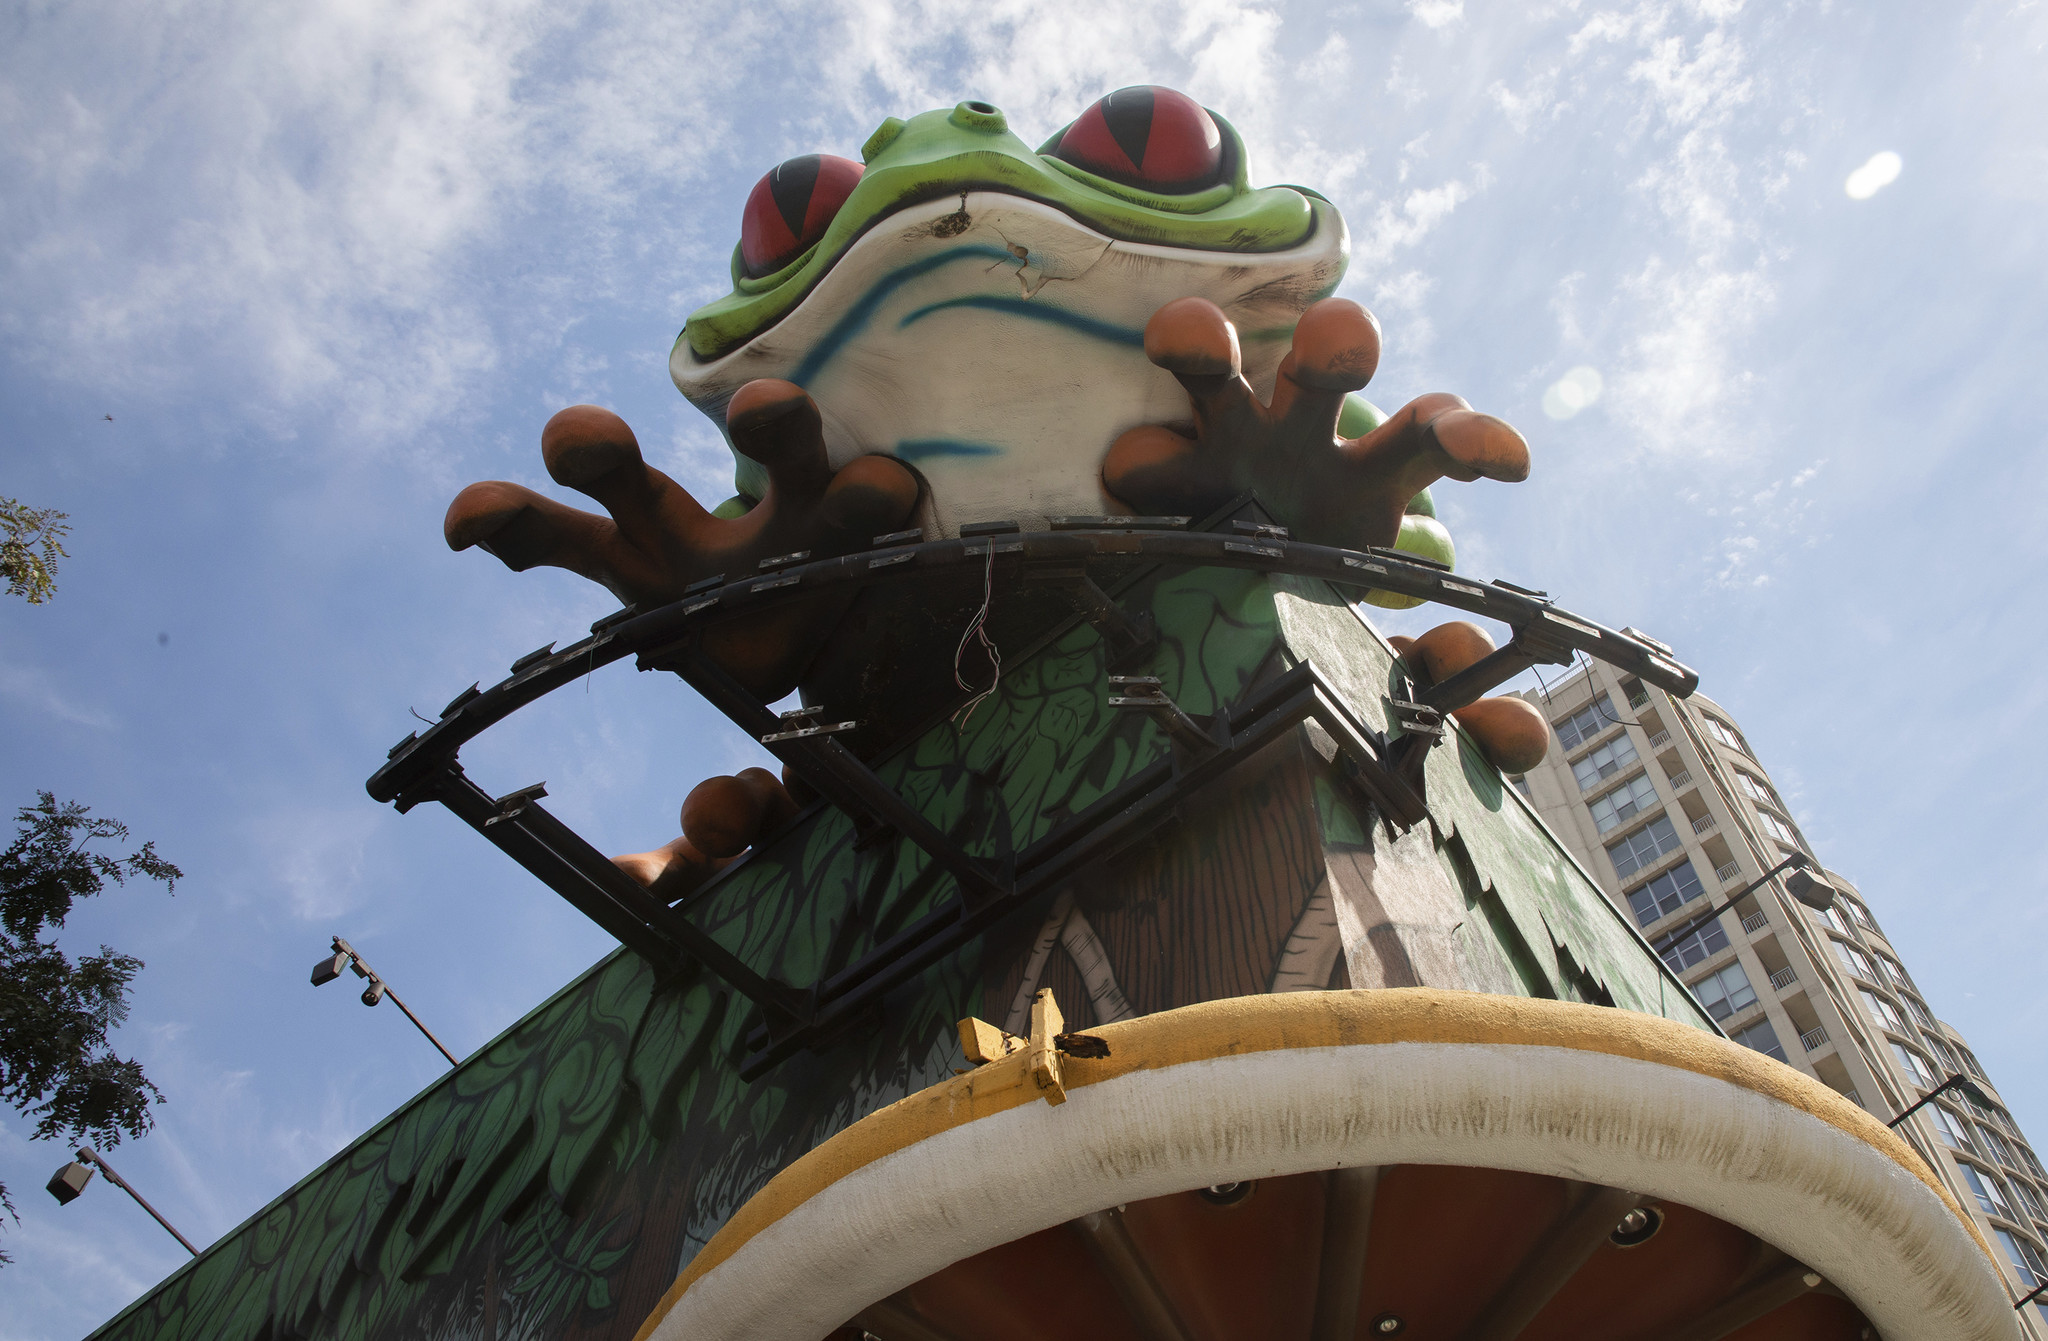 Rainforest Cafe at Woodfield Mall Closing – NBC Chicago